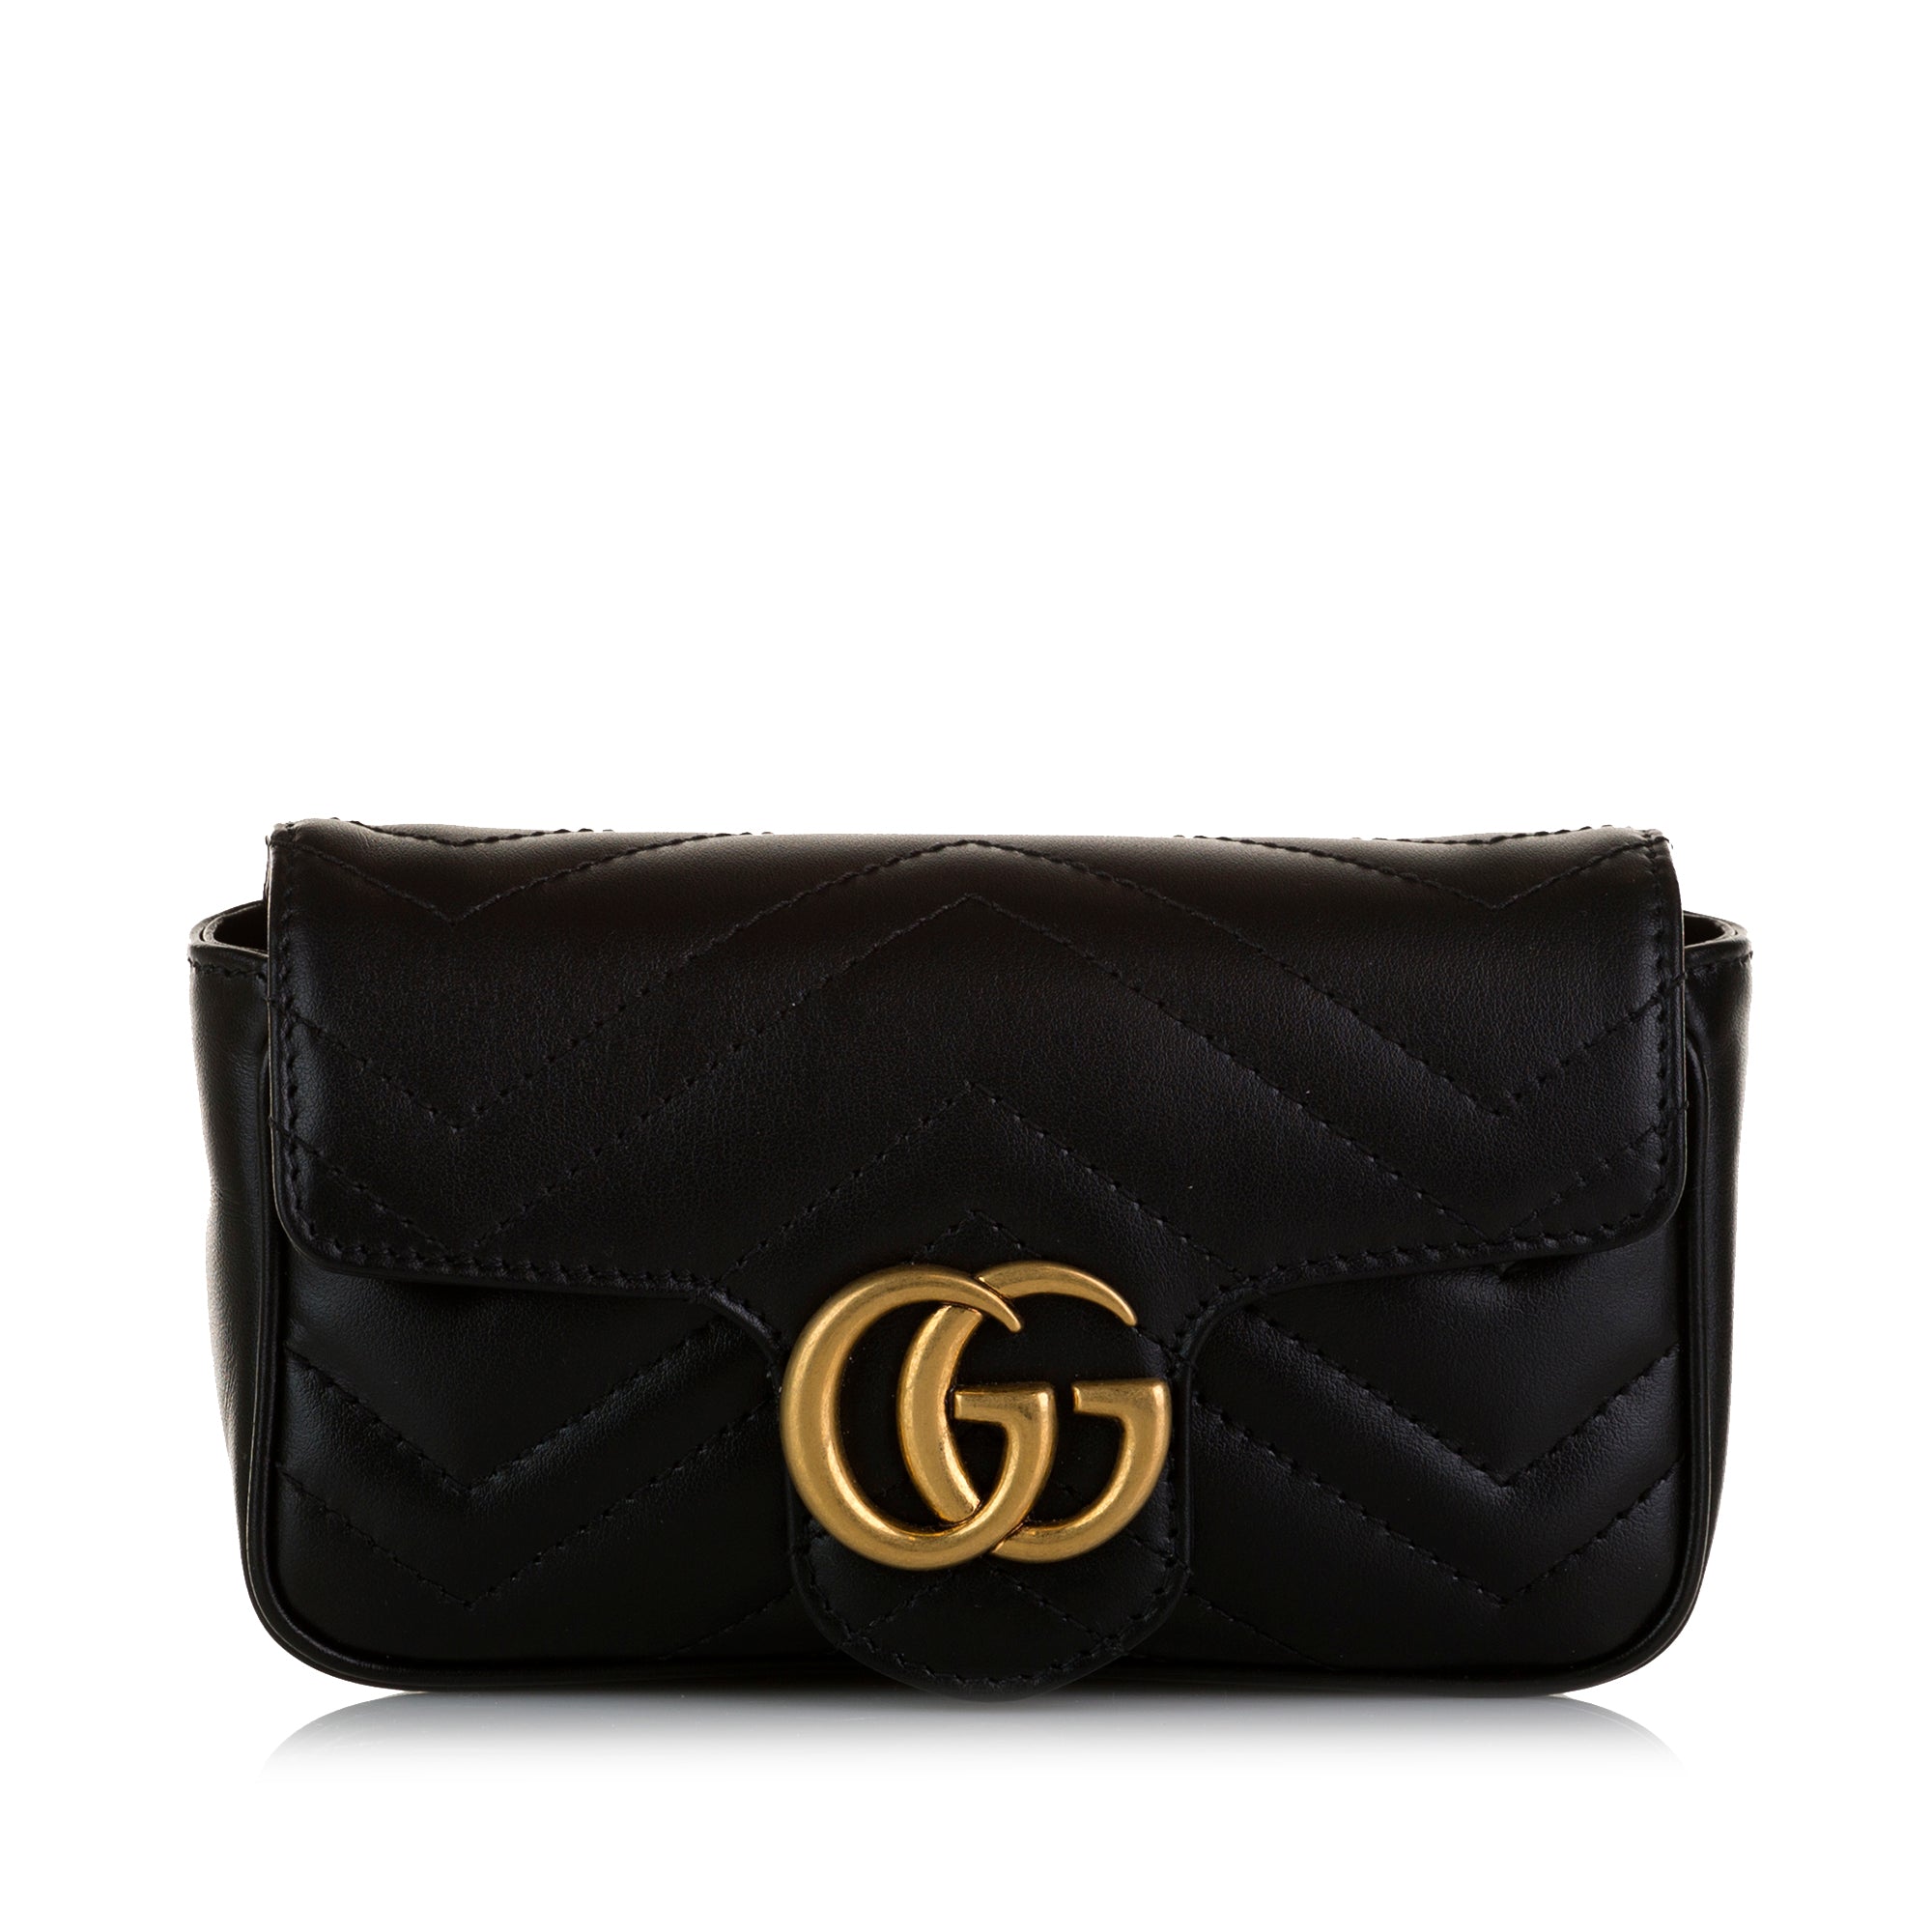 GUCCI GG Marmont super mini quilted leather shoulder bag  Gucci super mini,  Marmont super mini, Gg marmont super mini